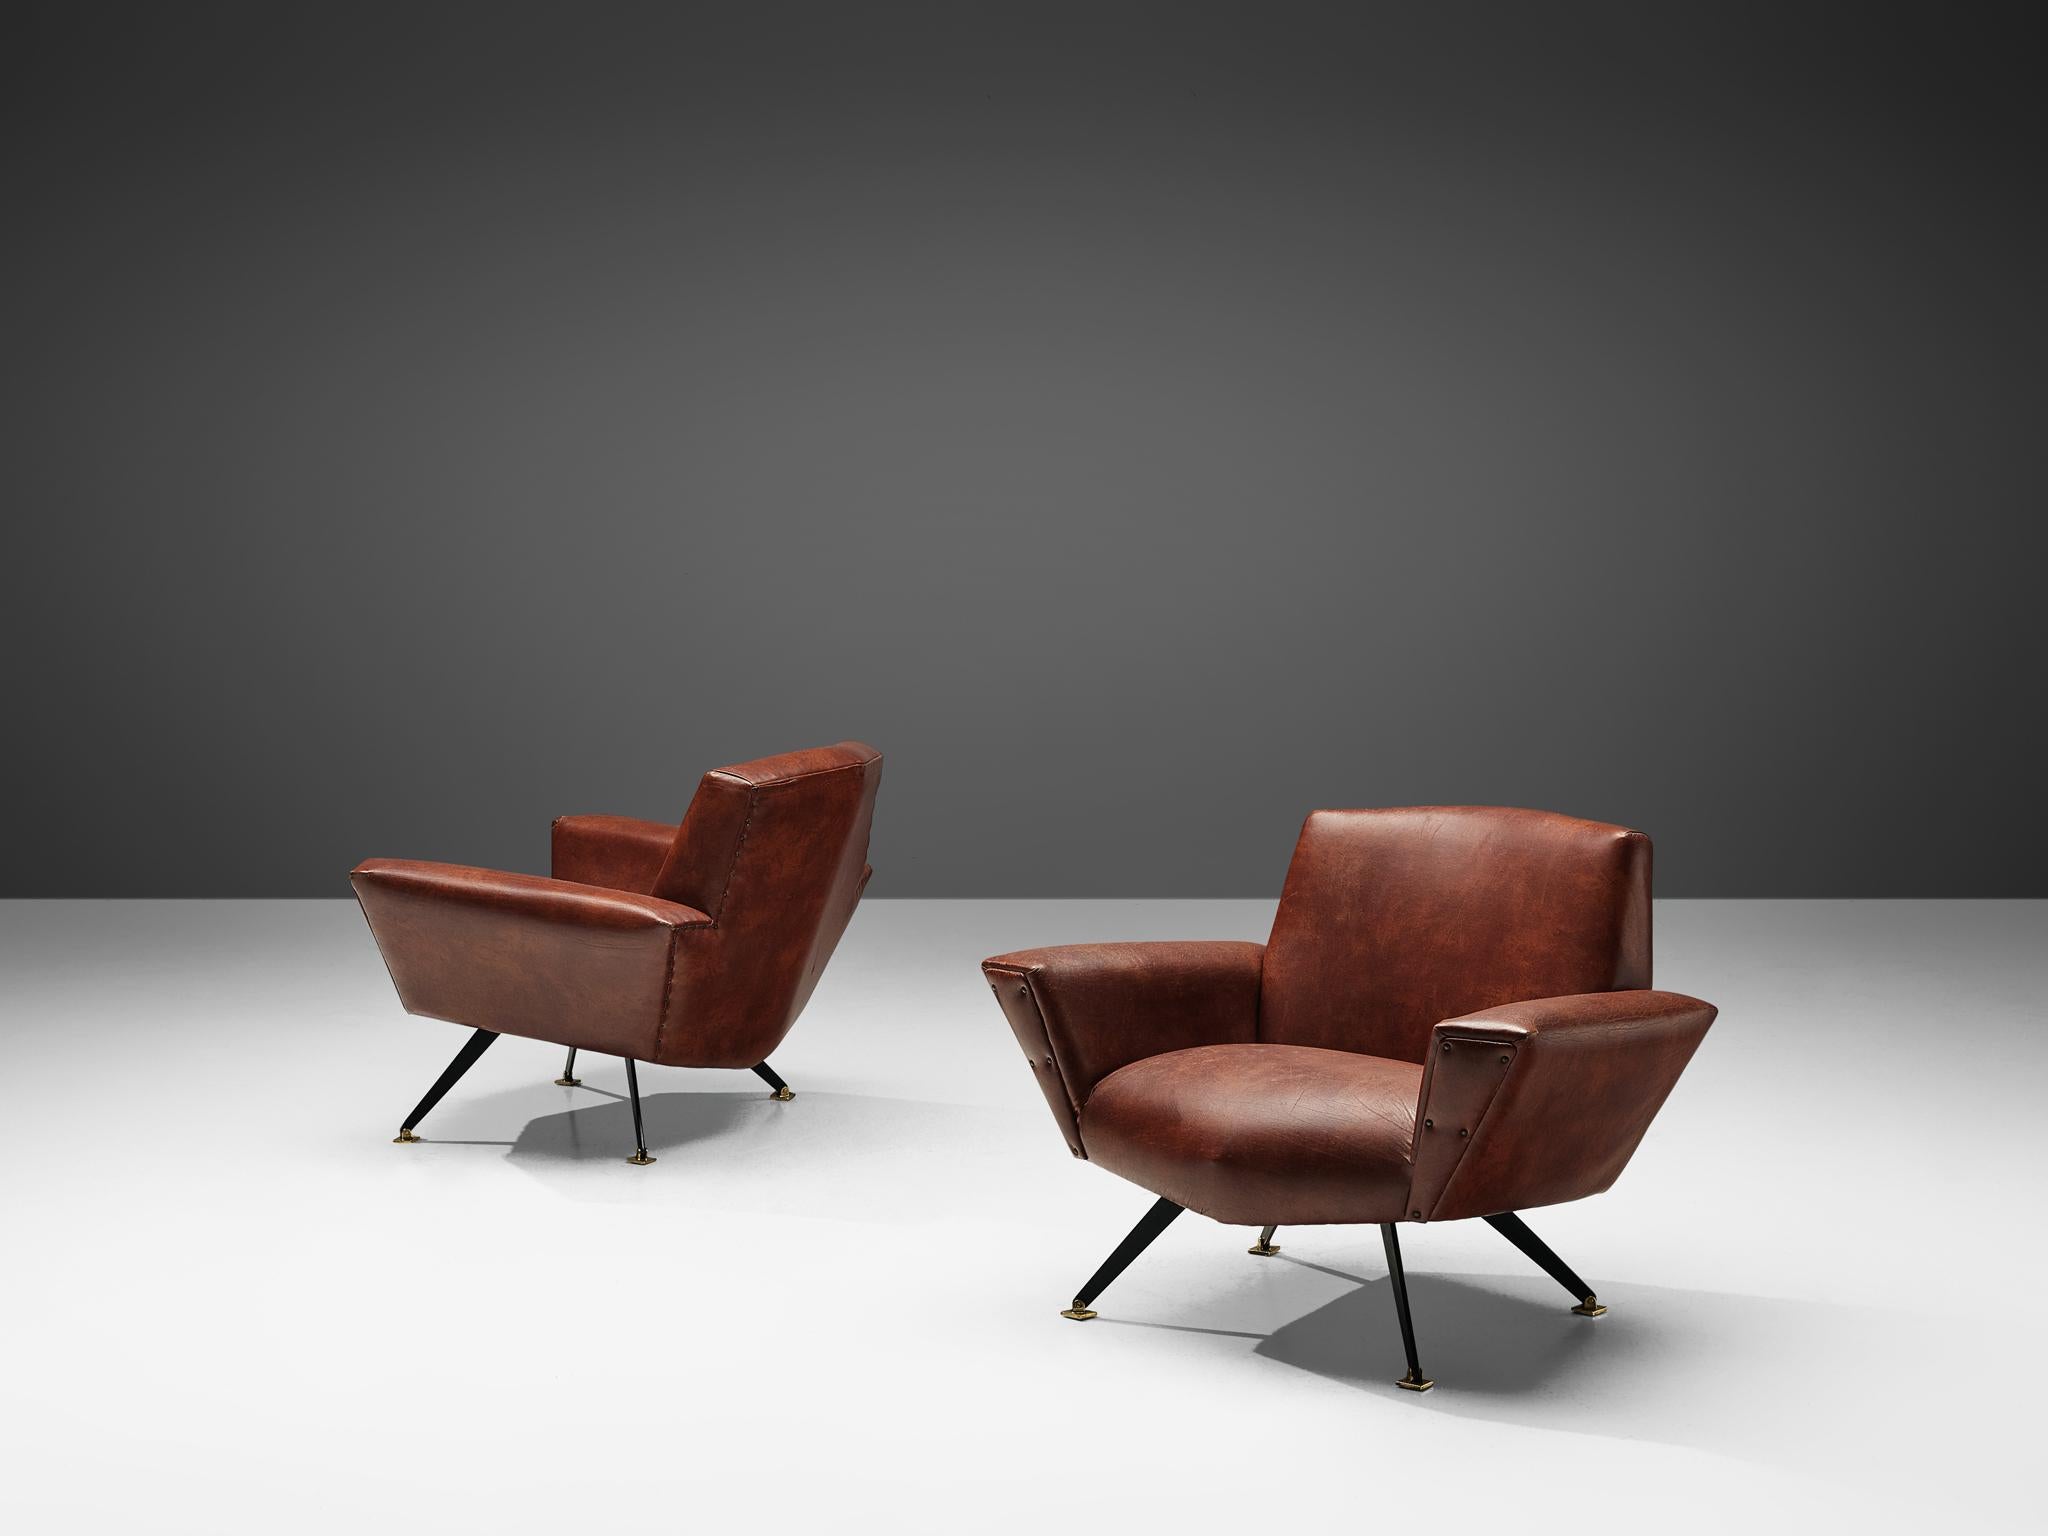 Studio APA for Lenzi, pair of club chairs model 'M538', leatherette, metal, brass, Italy, 1960s

This dynamic pair of armchairs originates from Italy and features a well-proportioned construction of sharp angles and straight lines. This piece of